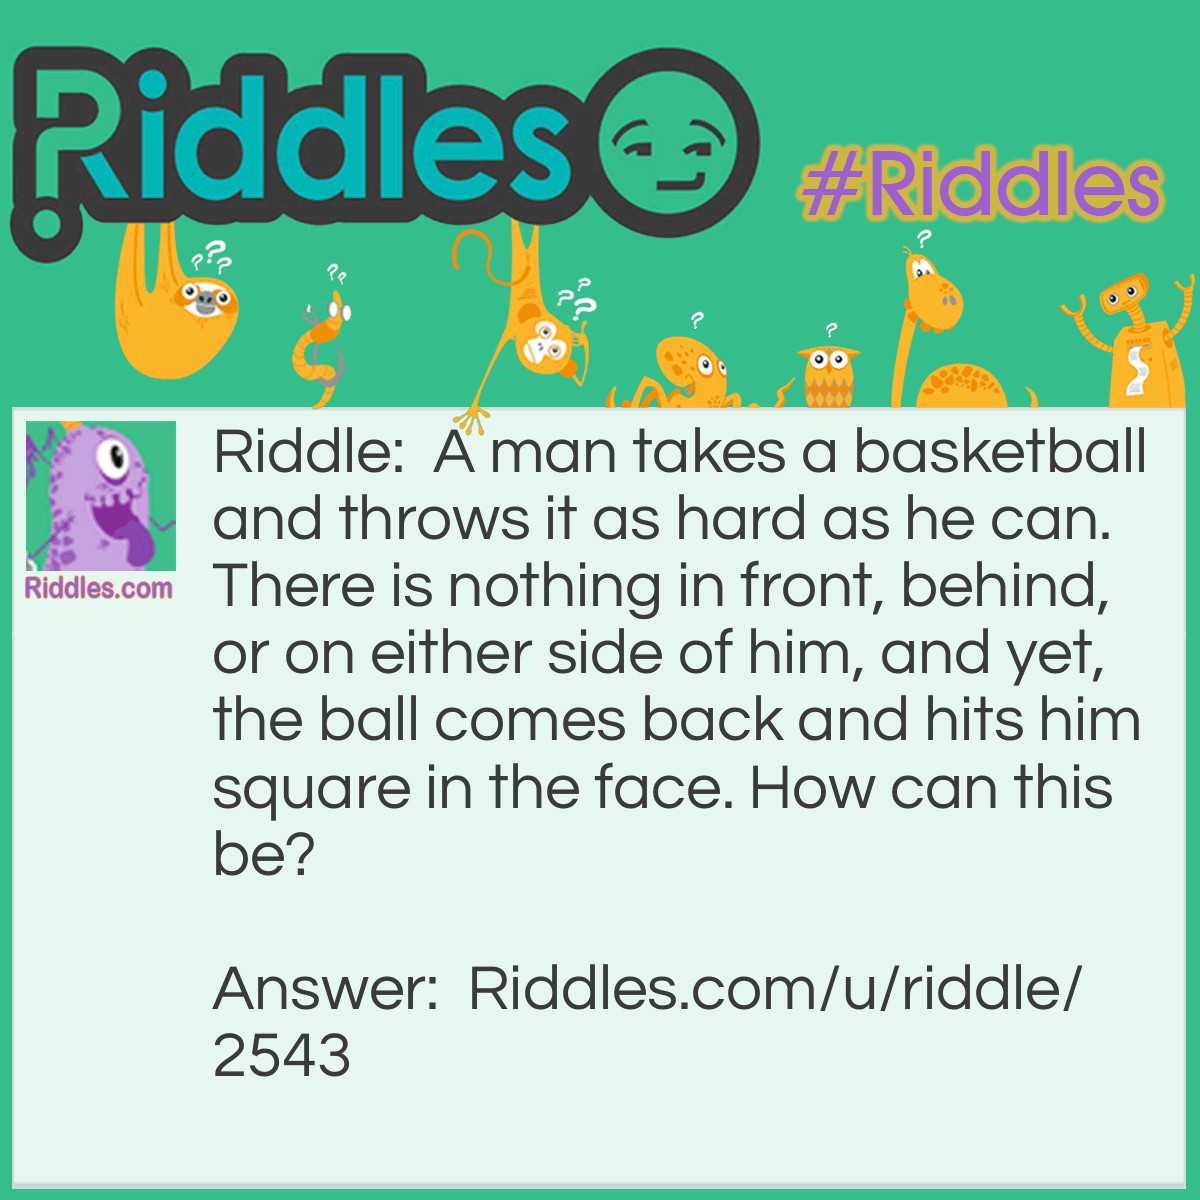 Riddle: A man takes a basketball and throws it as hard as he can. There is nothing in front, behind, or on either side of him, and yet, the ball comes back and hits him square in the face. How can this be? Answer: He threw the ball straight up in the air.